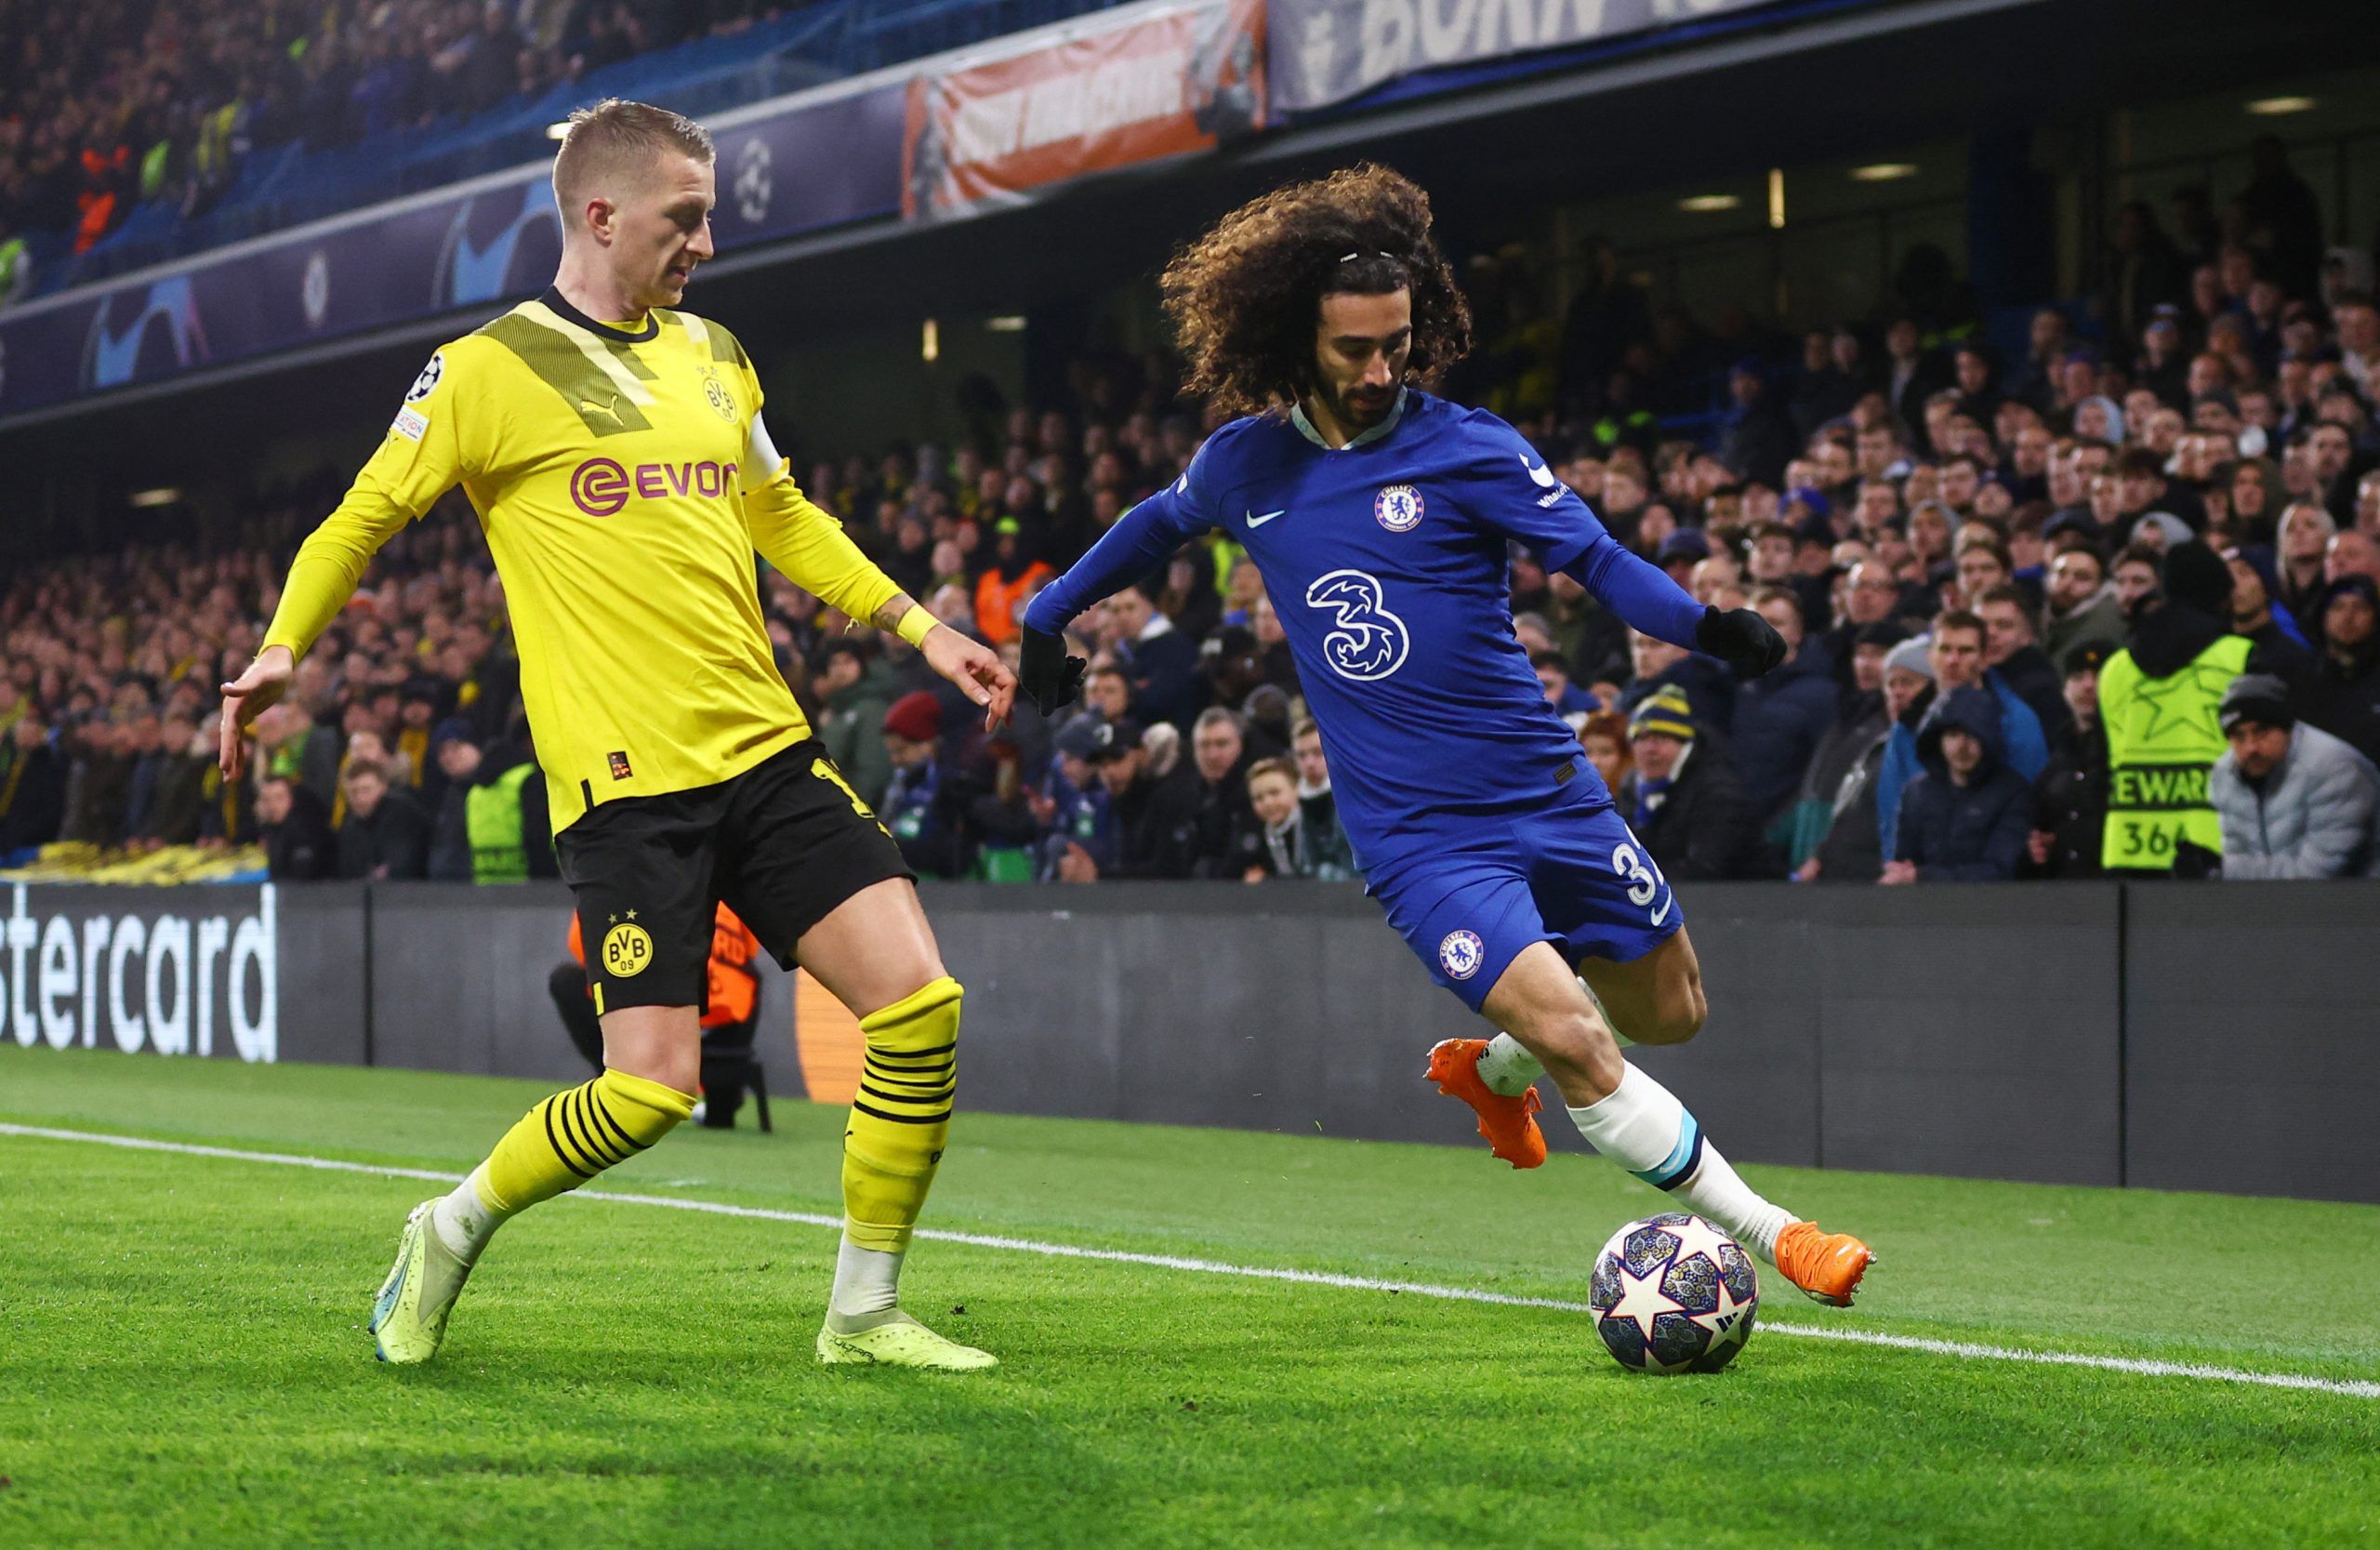 Soccer Football - Champions League - Round of 16 - Second Leg - Chelsea v Borussia Dortmund - Stamford Bridge, London, Britain - March 7, 2023 Borussia Dortmund's Marco Reus in action with Chelsea's Marc Cucurella REUTERS/Hannah Mckay